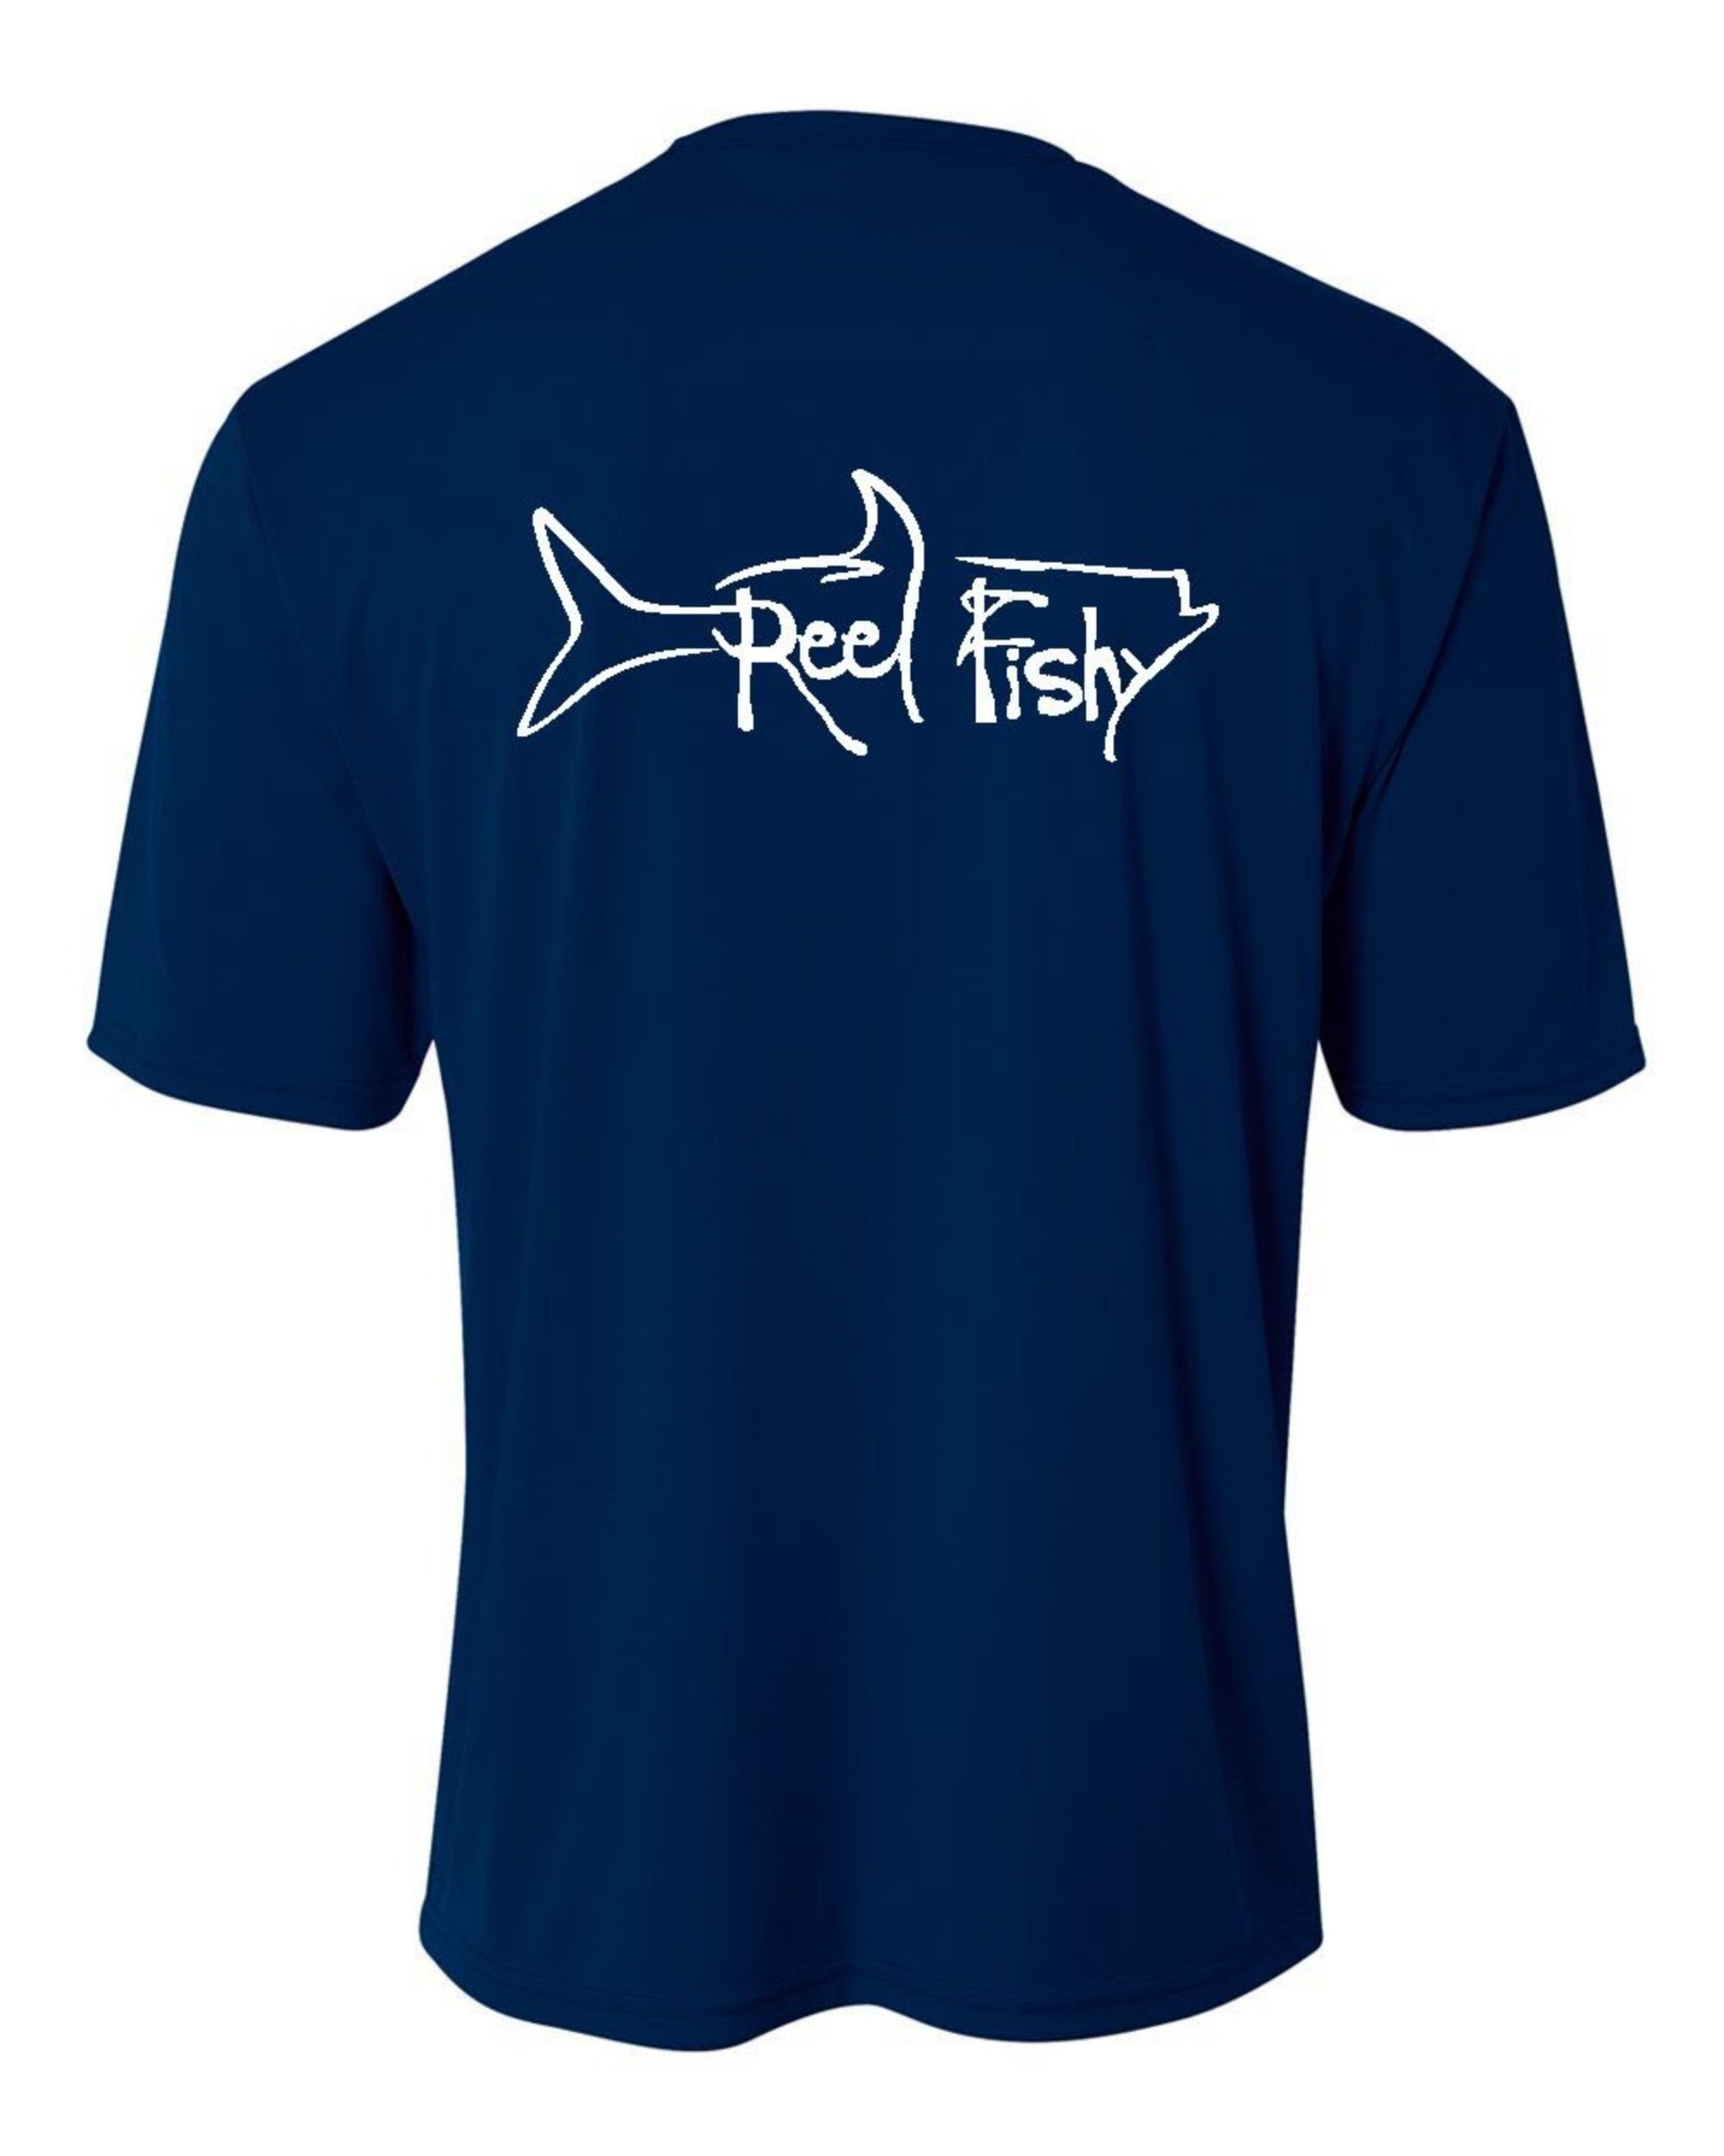 Youth Performance Dry-Fit Tarpon Fishing Shirts with Sun Protection by Reel Fishy Apparel - Short Sleeve Navy